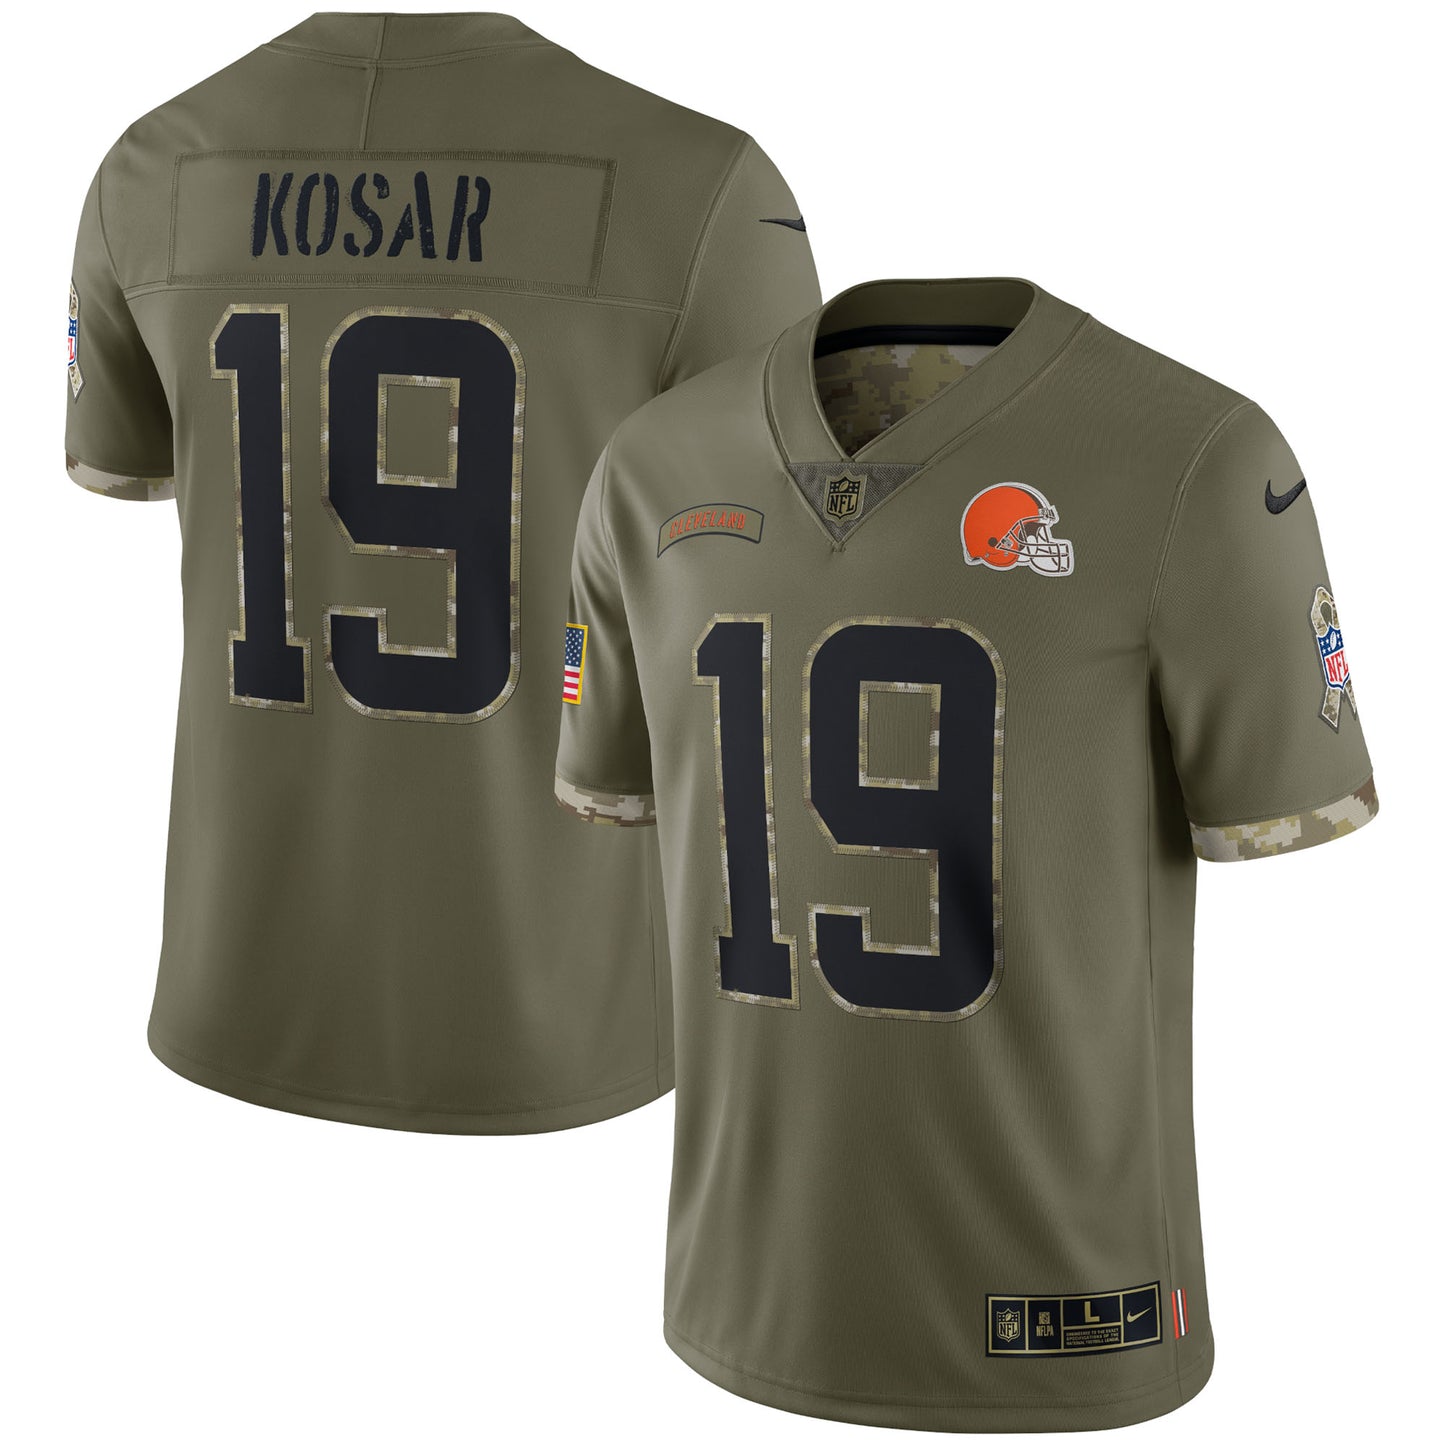 Bernie Kosar Cleveland Browns 2022 Salute To Service Retired Player Limited Jersey - Olive